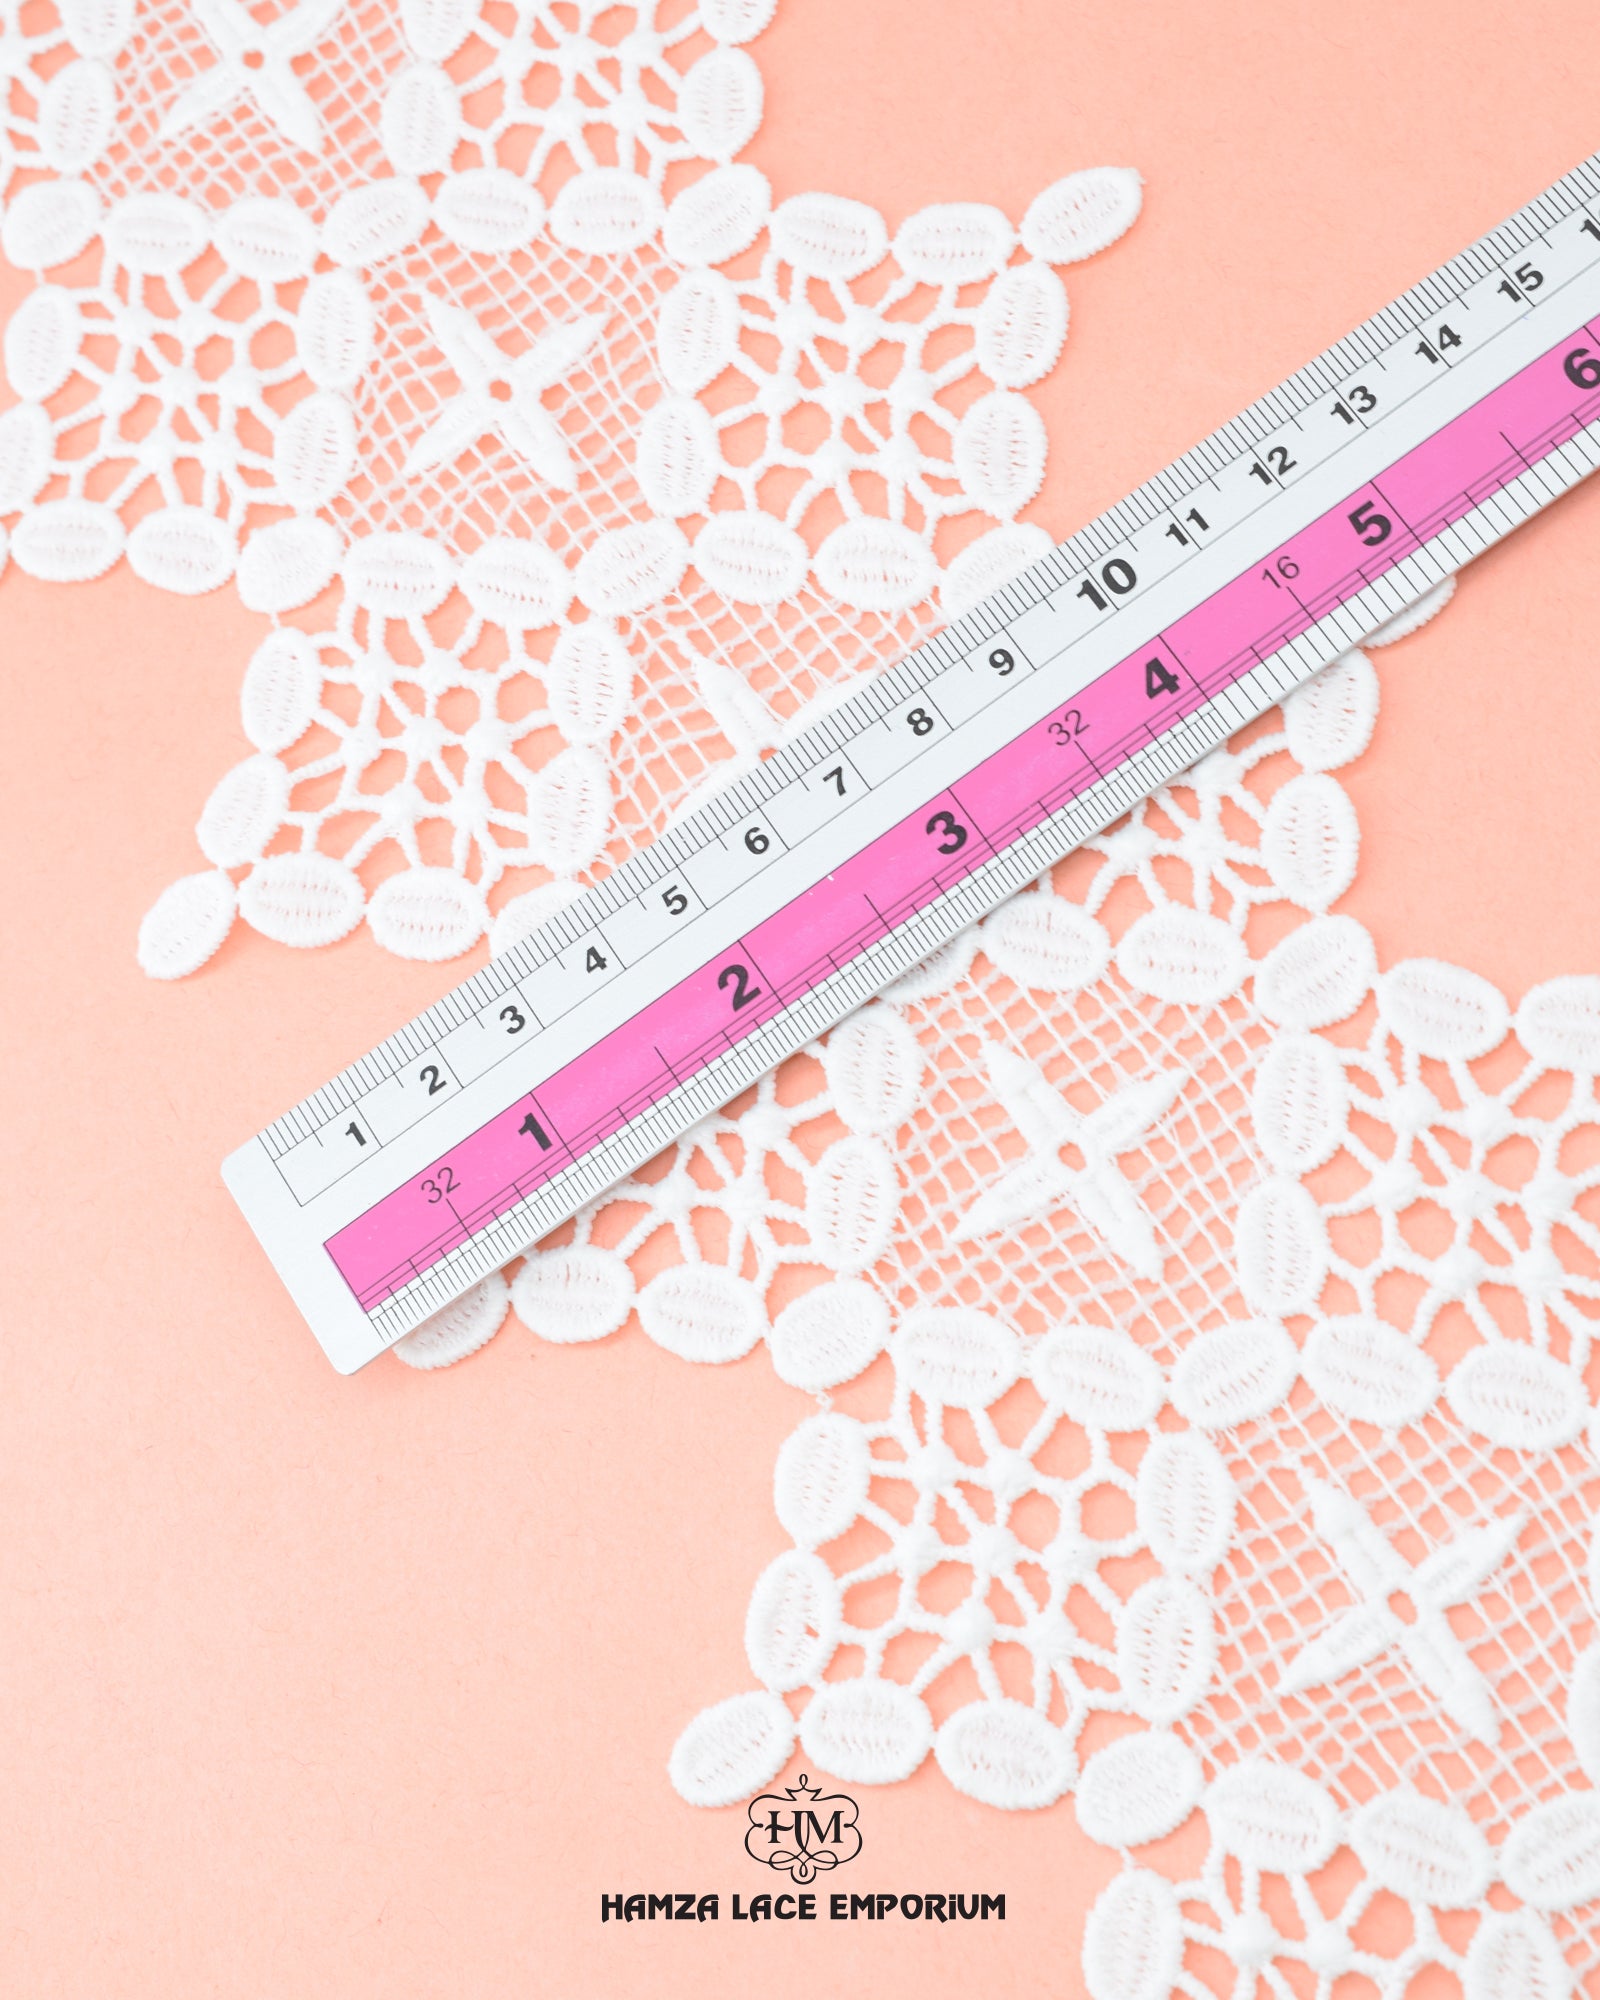 Size of the 'Center Filling Lace 17186' is given as '1.25' inches by placing a ruler on it